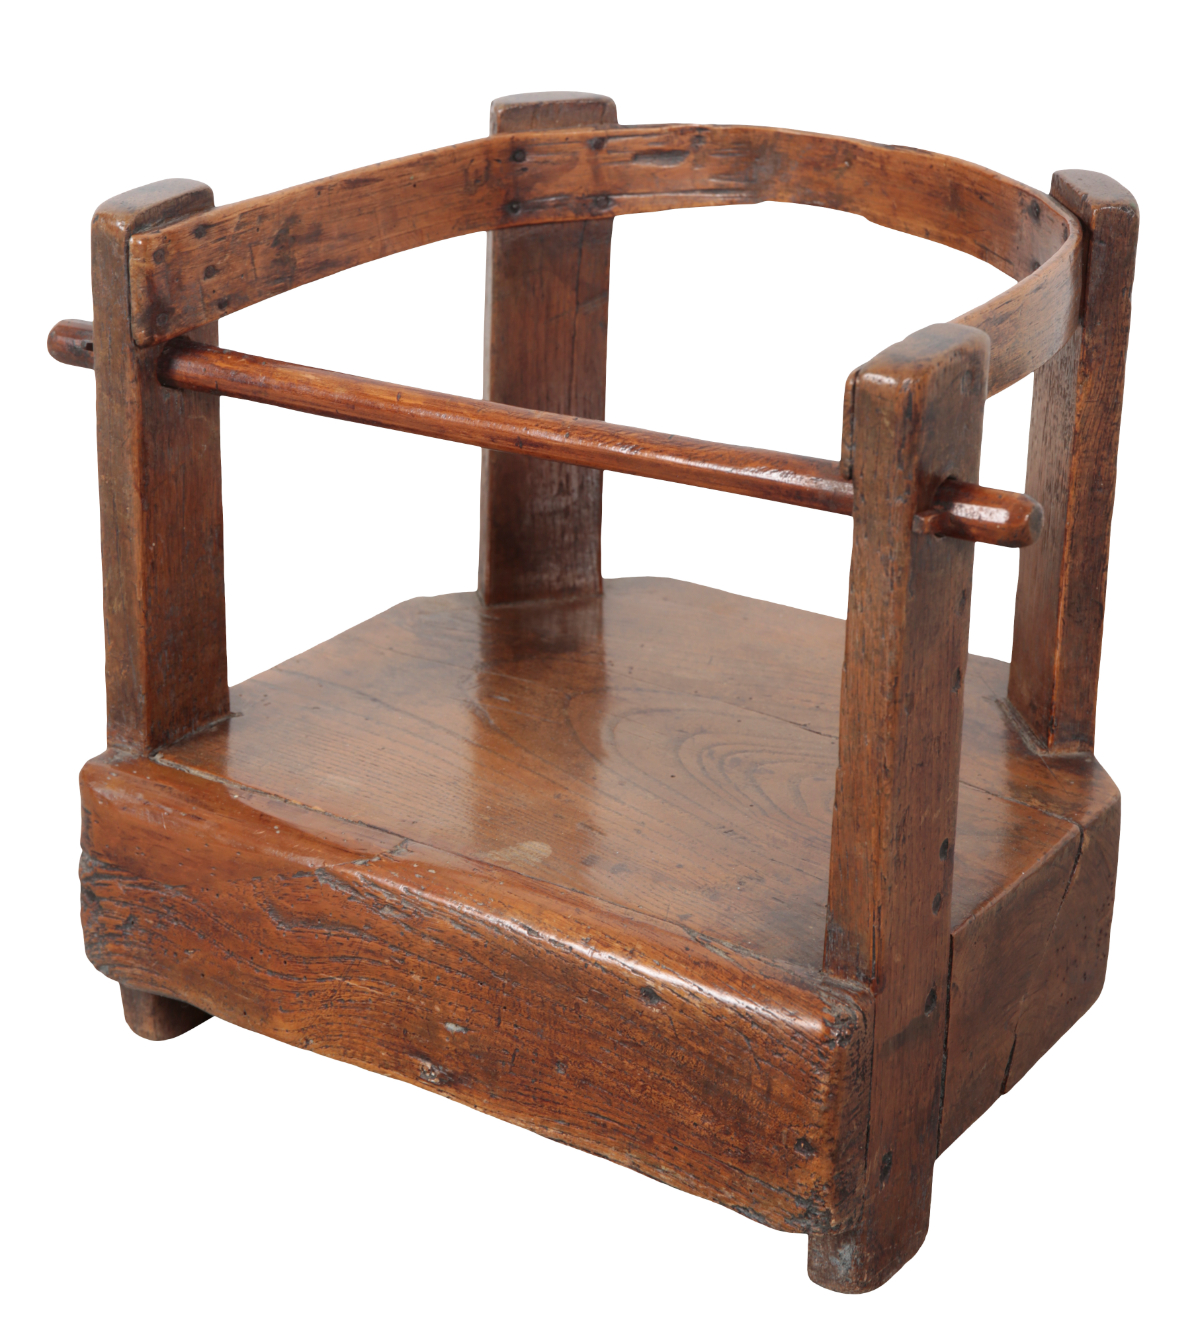 A PROVINCIAL ELM CHILDS CHAIR 19th